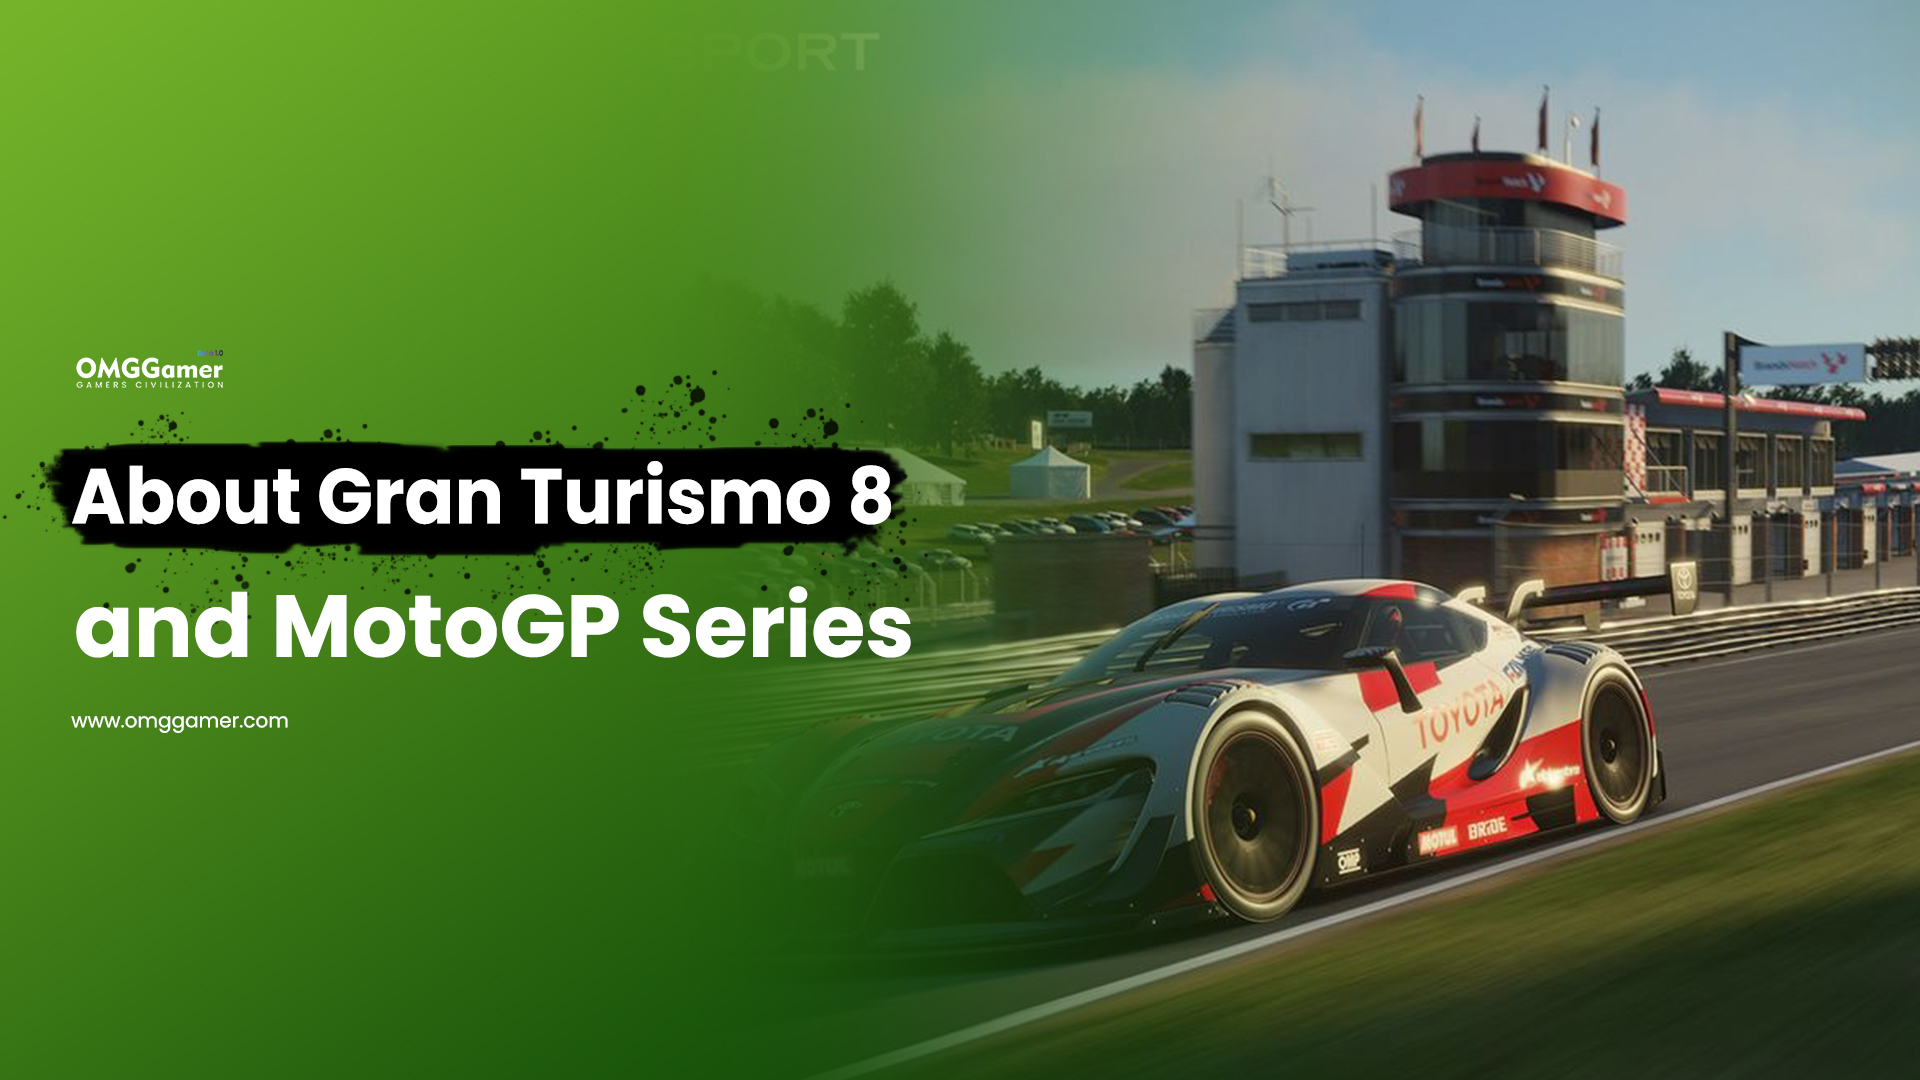 About Gran Turismo 8 and MotoGP Series